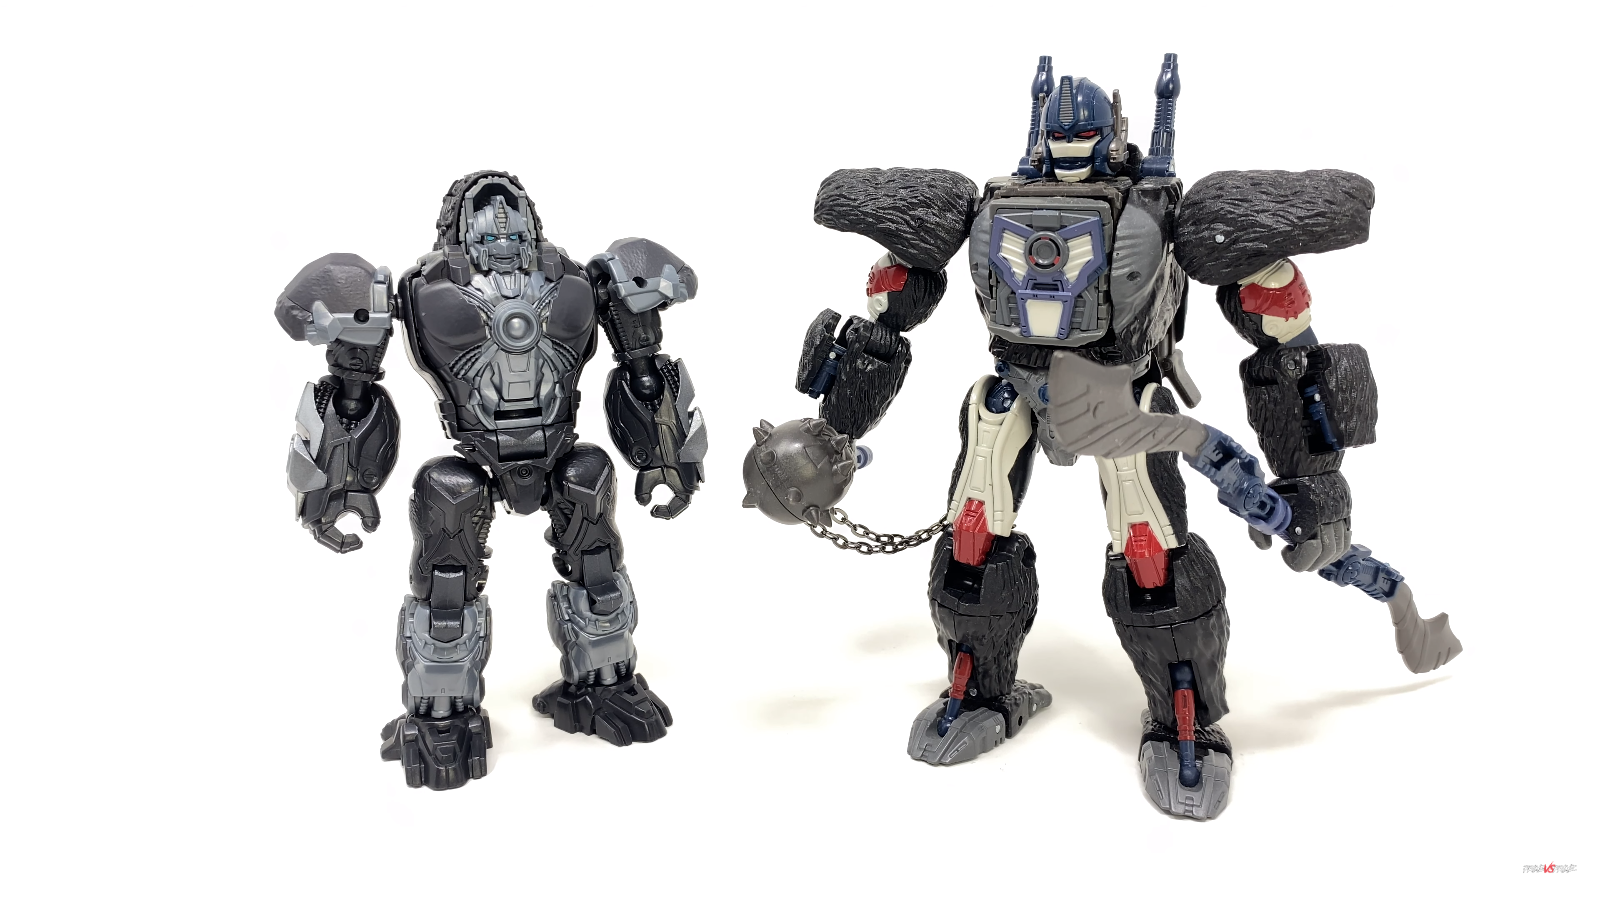 Transformers News: New Review Shows Scale of Rise of the Beasts Optimus Primal Figure